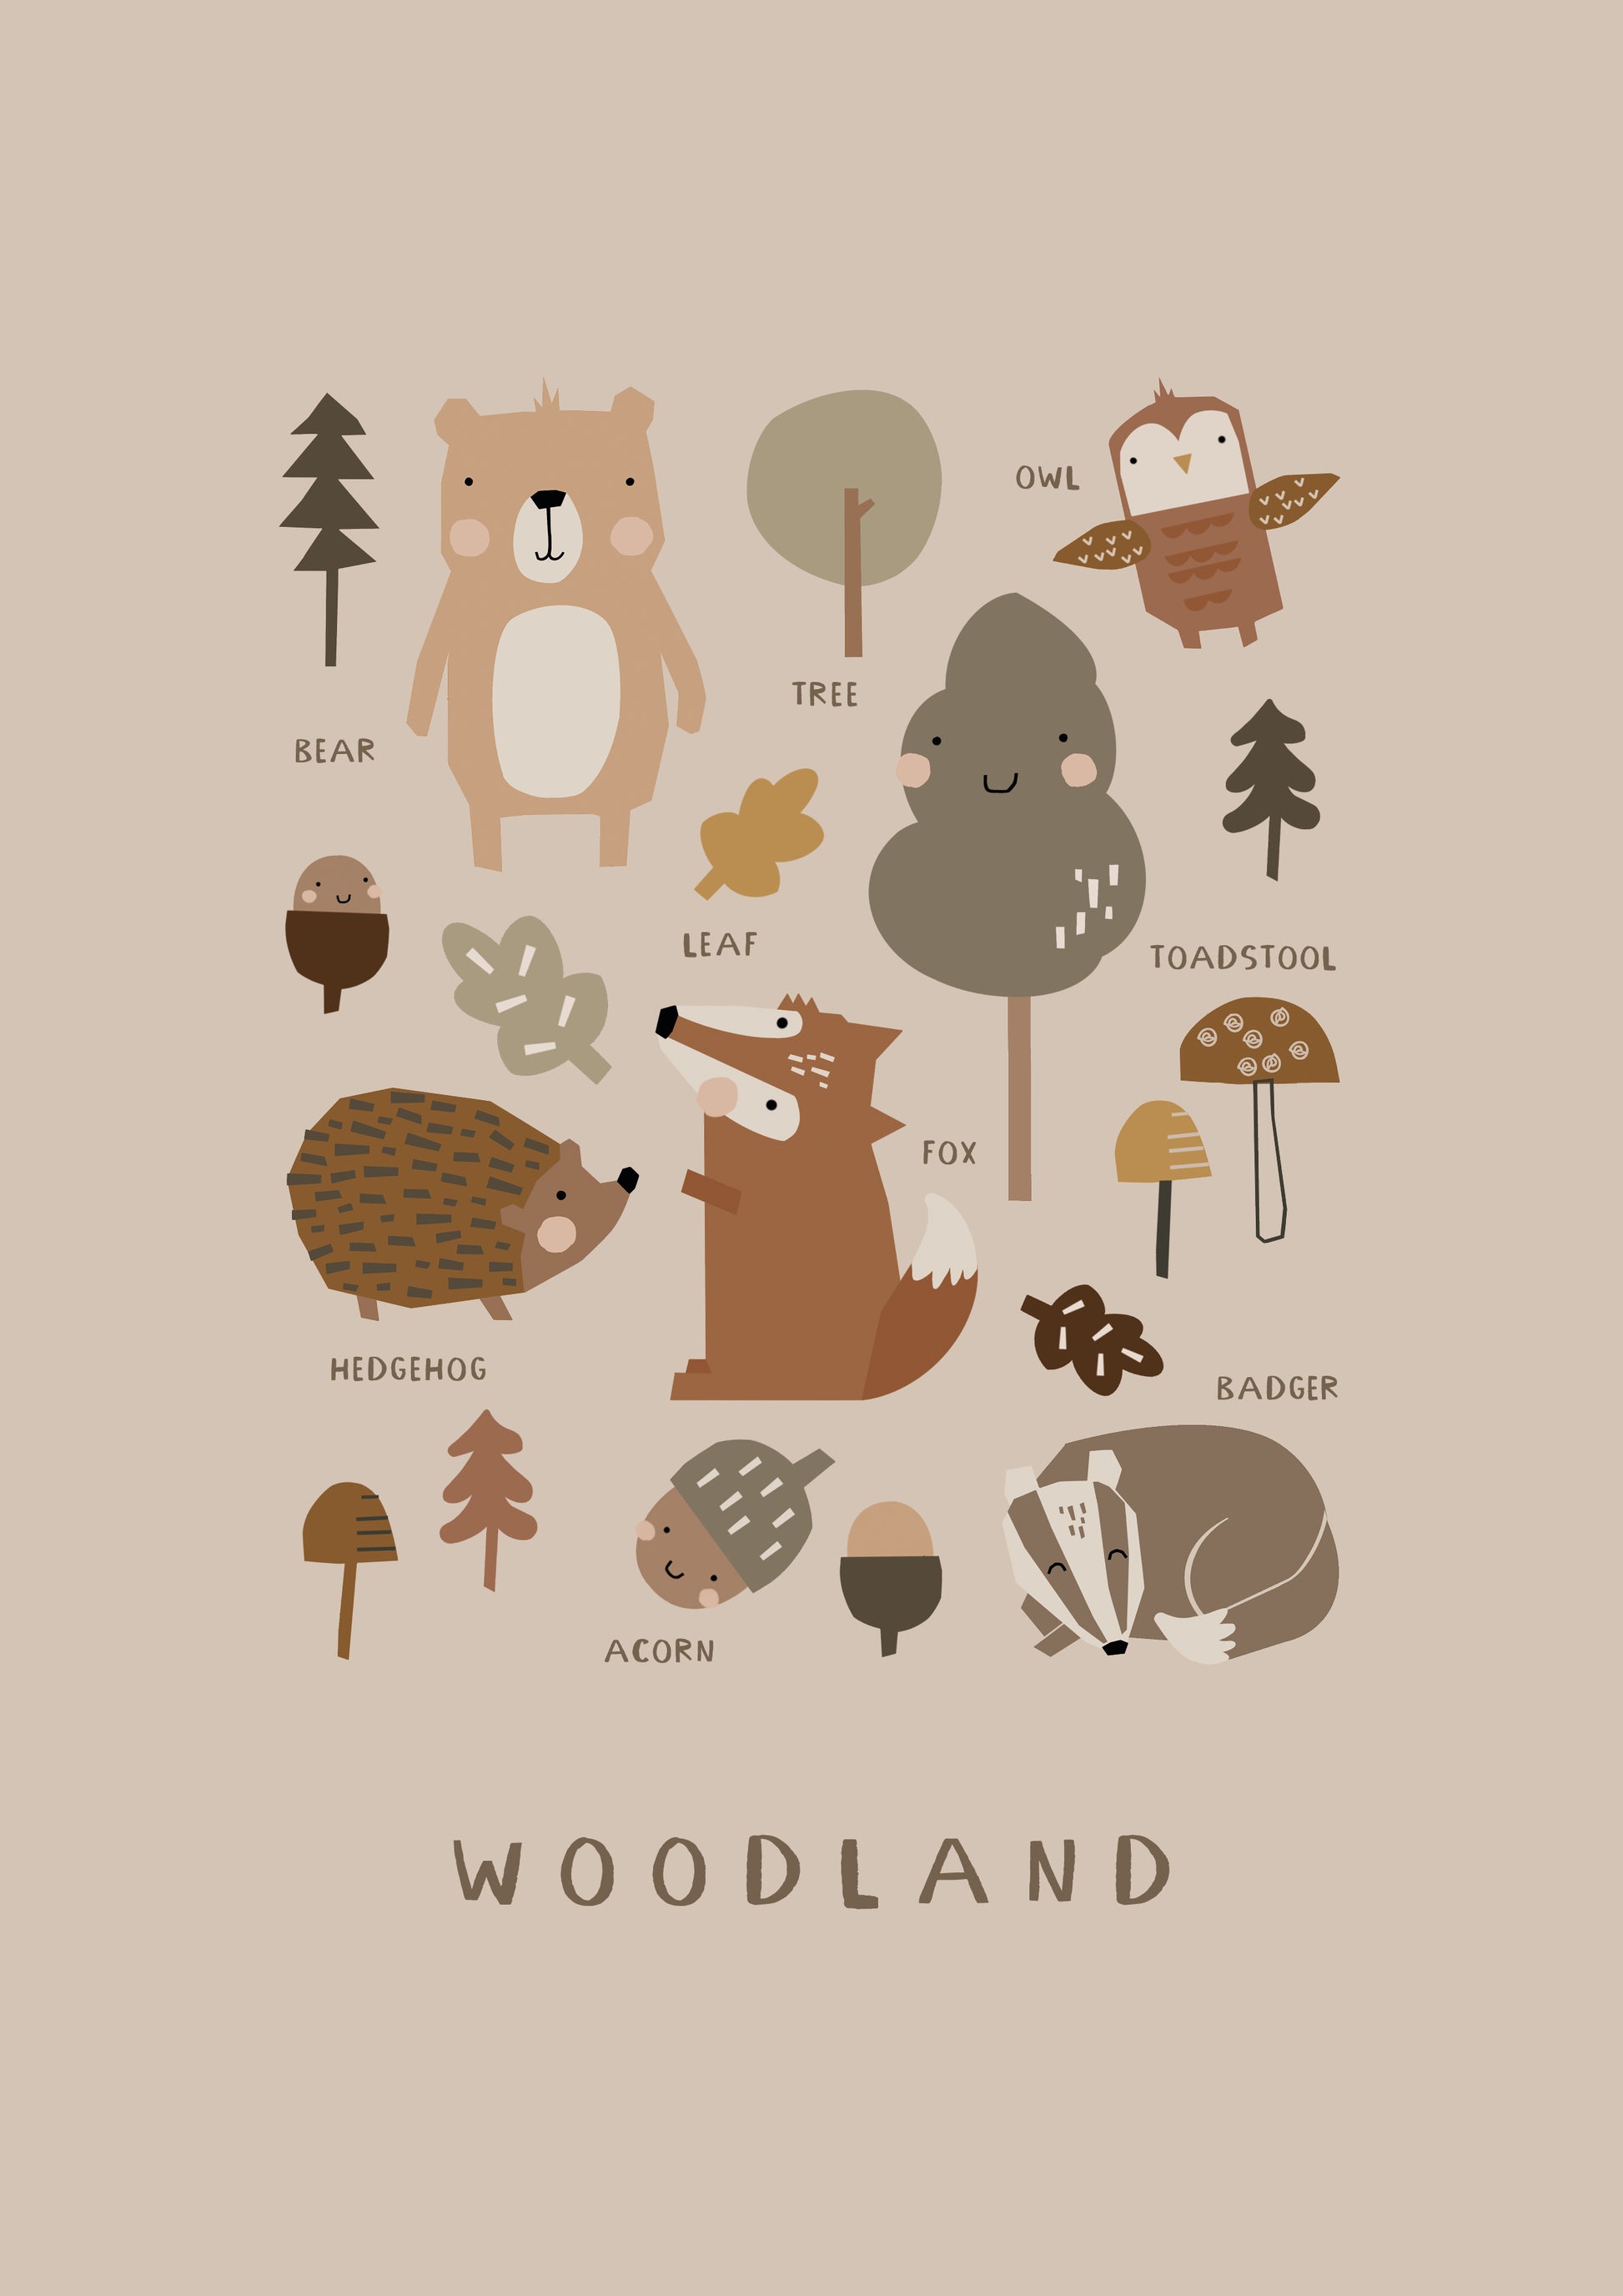 Nursery wall art print with neutral background with a muted simple design of animal illustrations and things you'd find on a nature walk. Trees, leaves, acorns, toadstools, bear, owl, fox, hedgehog, badger